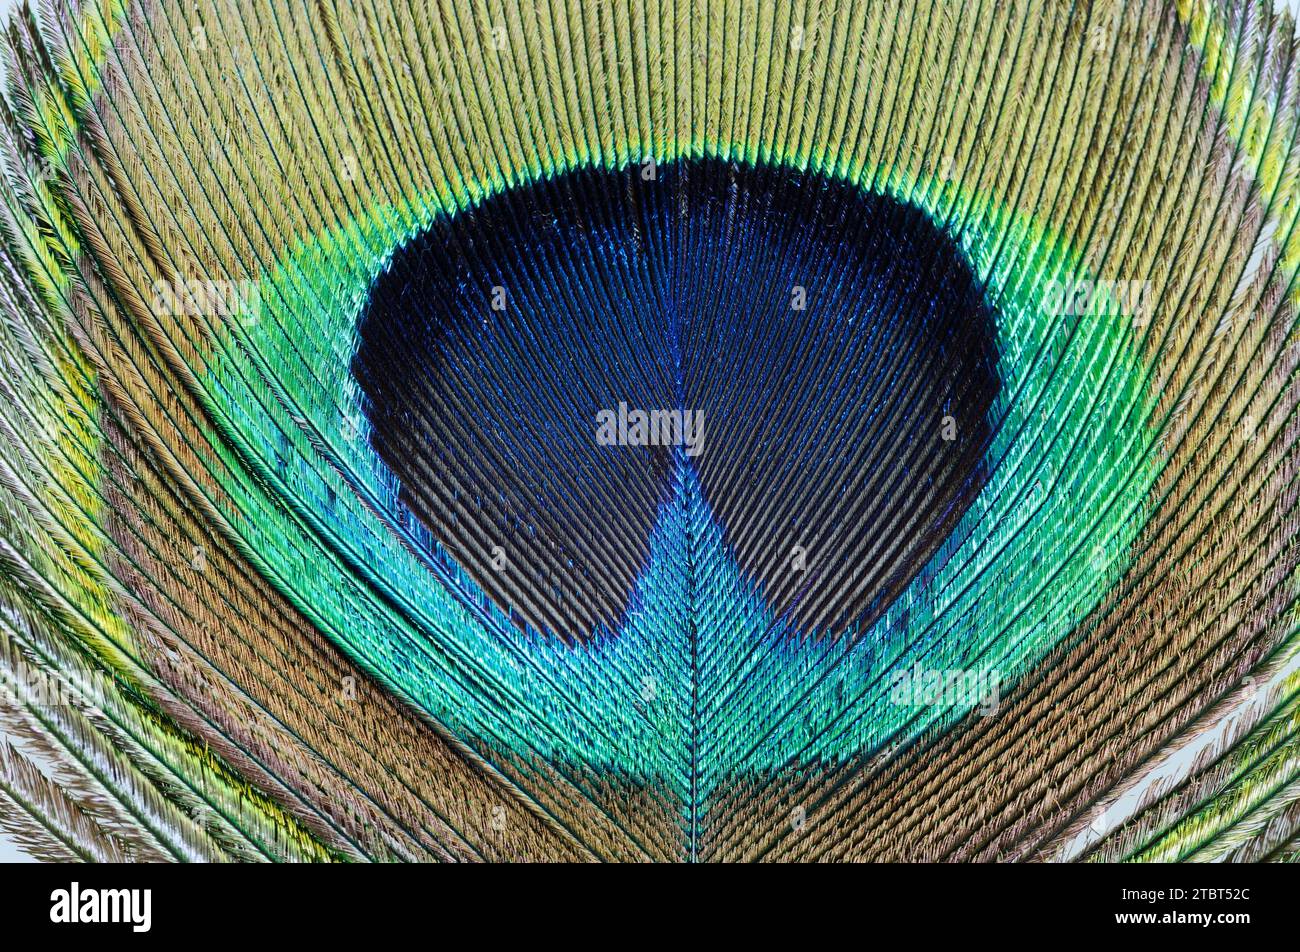 Blue peacock (Pavo cristatus), detail of a decorative feather from a male peacock Stock Photo